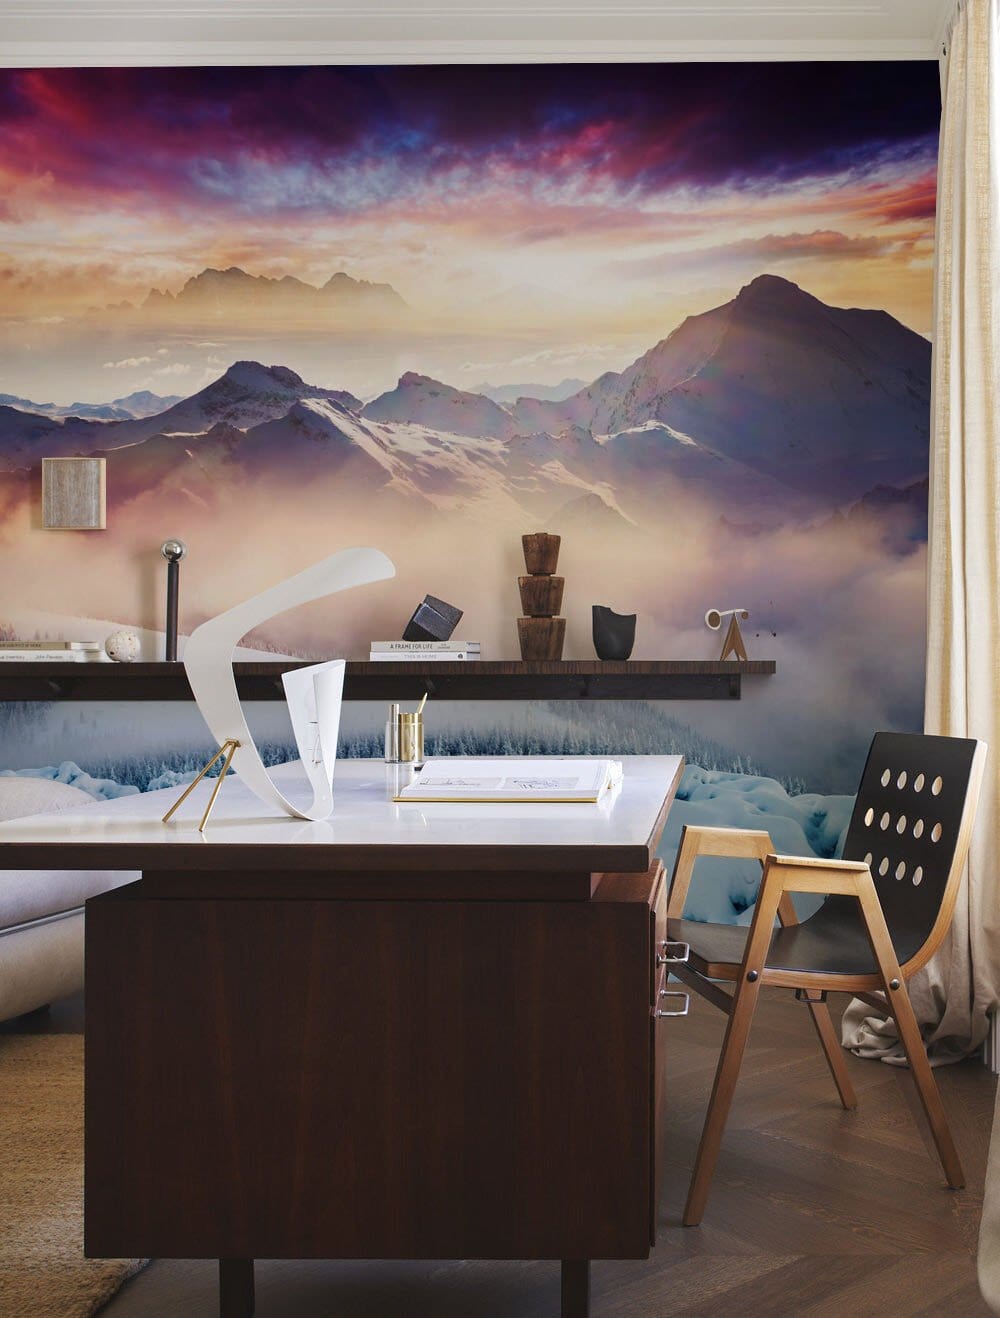 Wallpaper mural depicting a sunset over a mountain in the evening after snowfall.